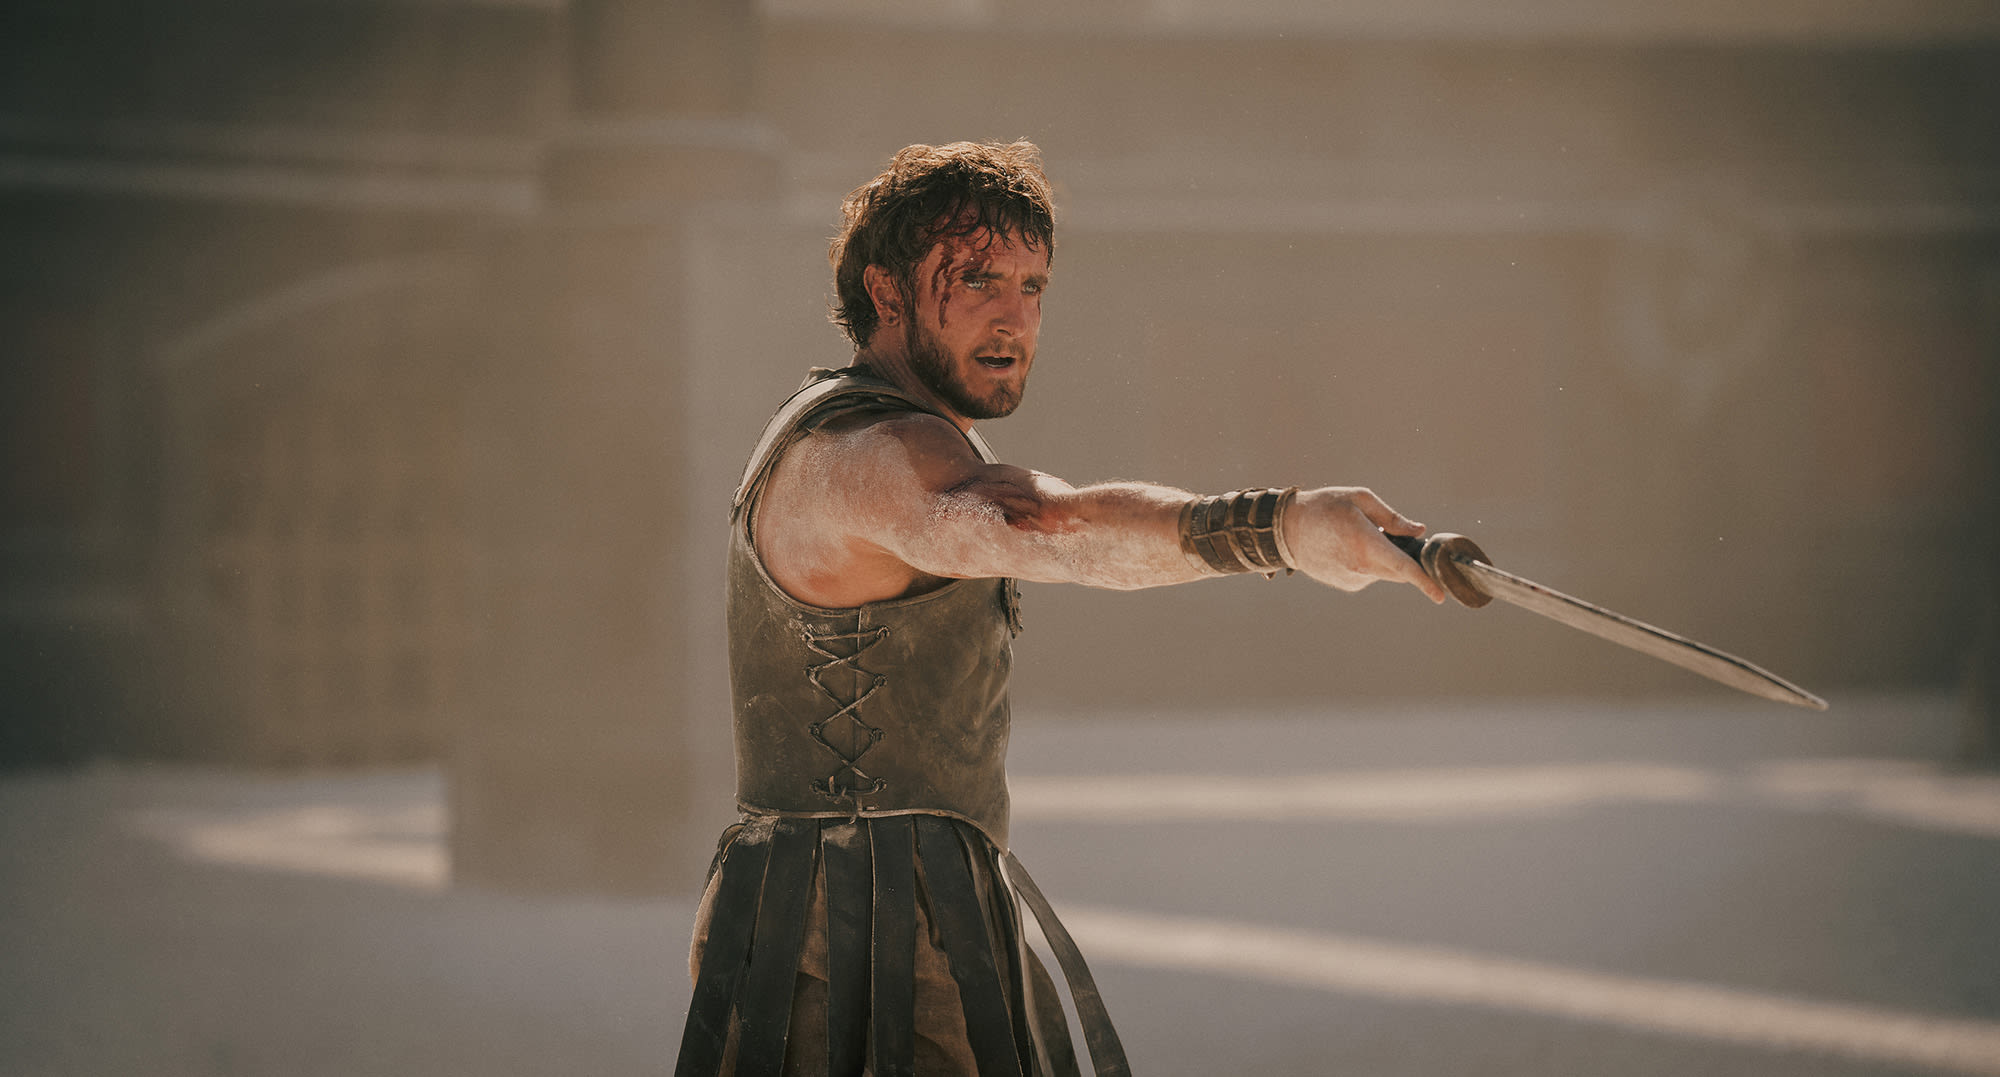 ‘Gladiator 2’ Director Ridley Scott Talks Filming the ‘Biggest Action Sequence’ of His Career